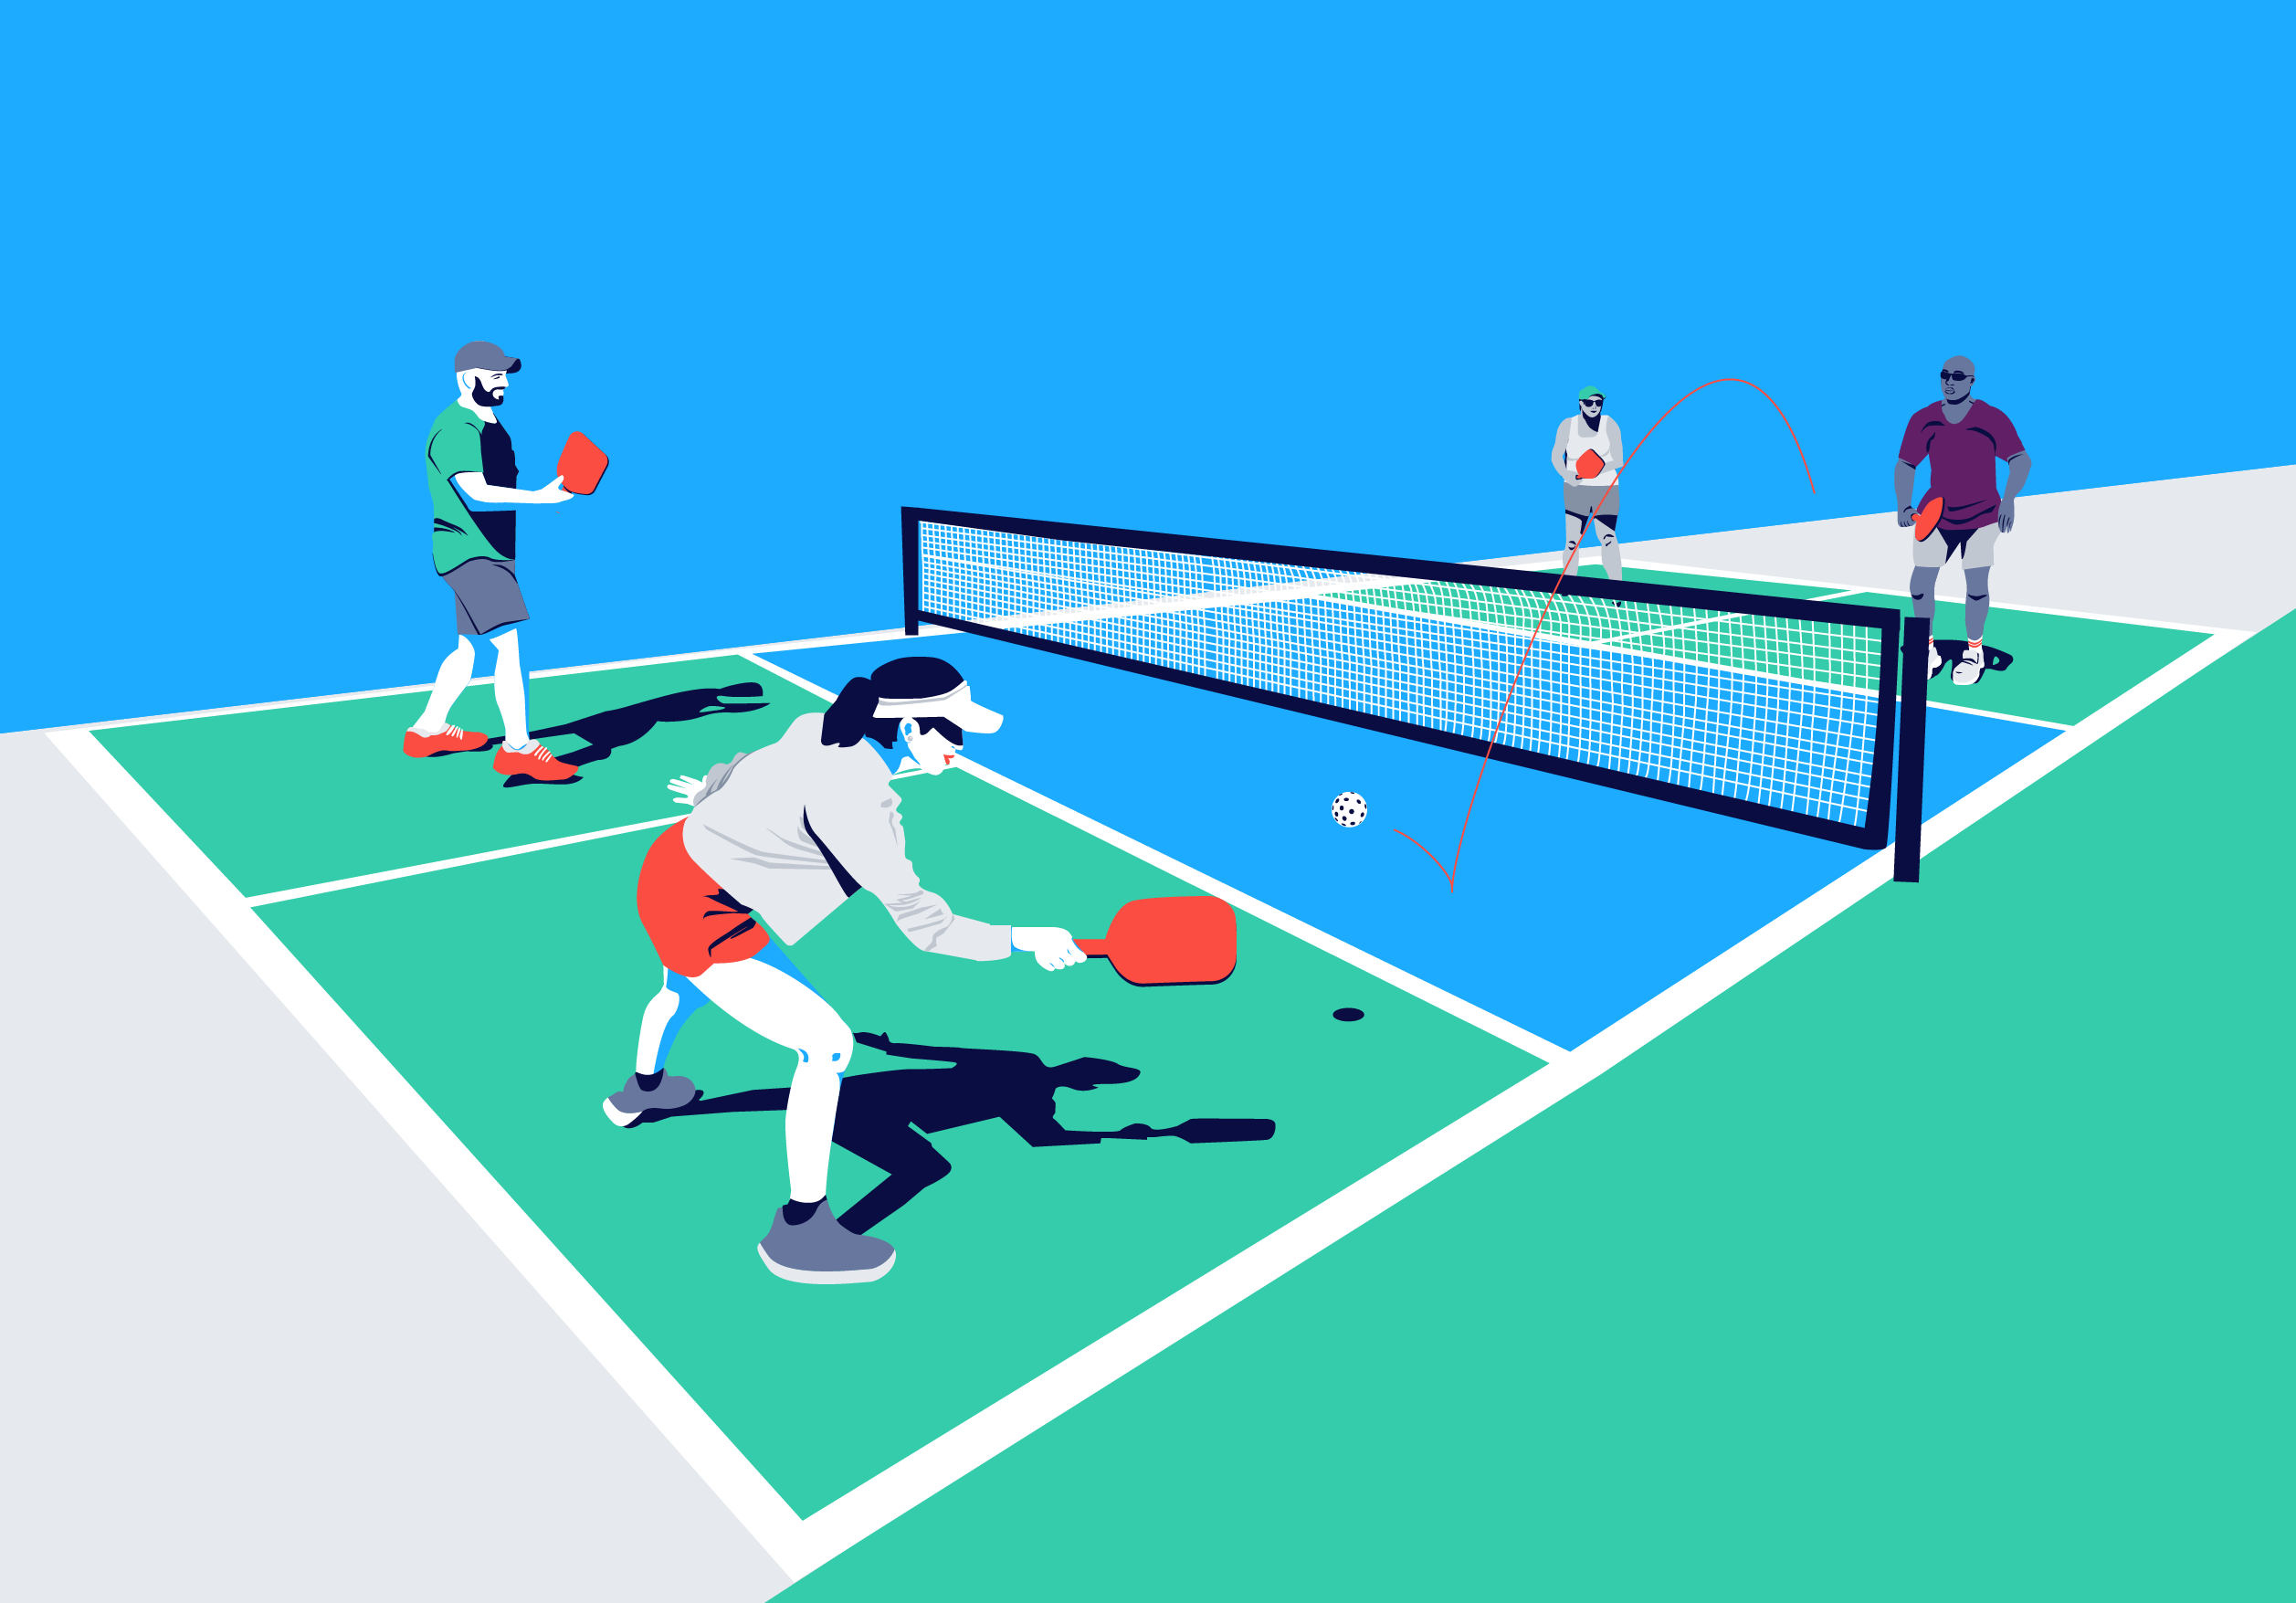 Illustration of people playing pickleball